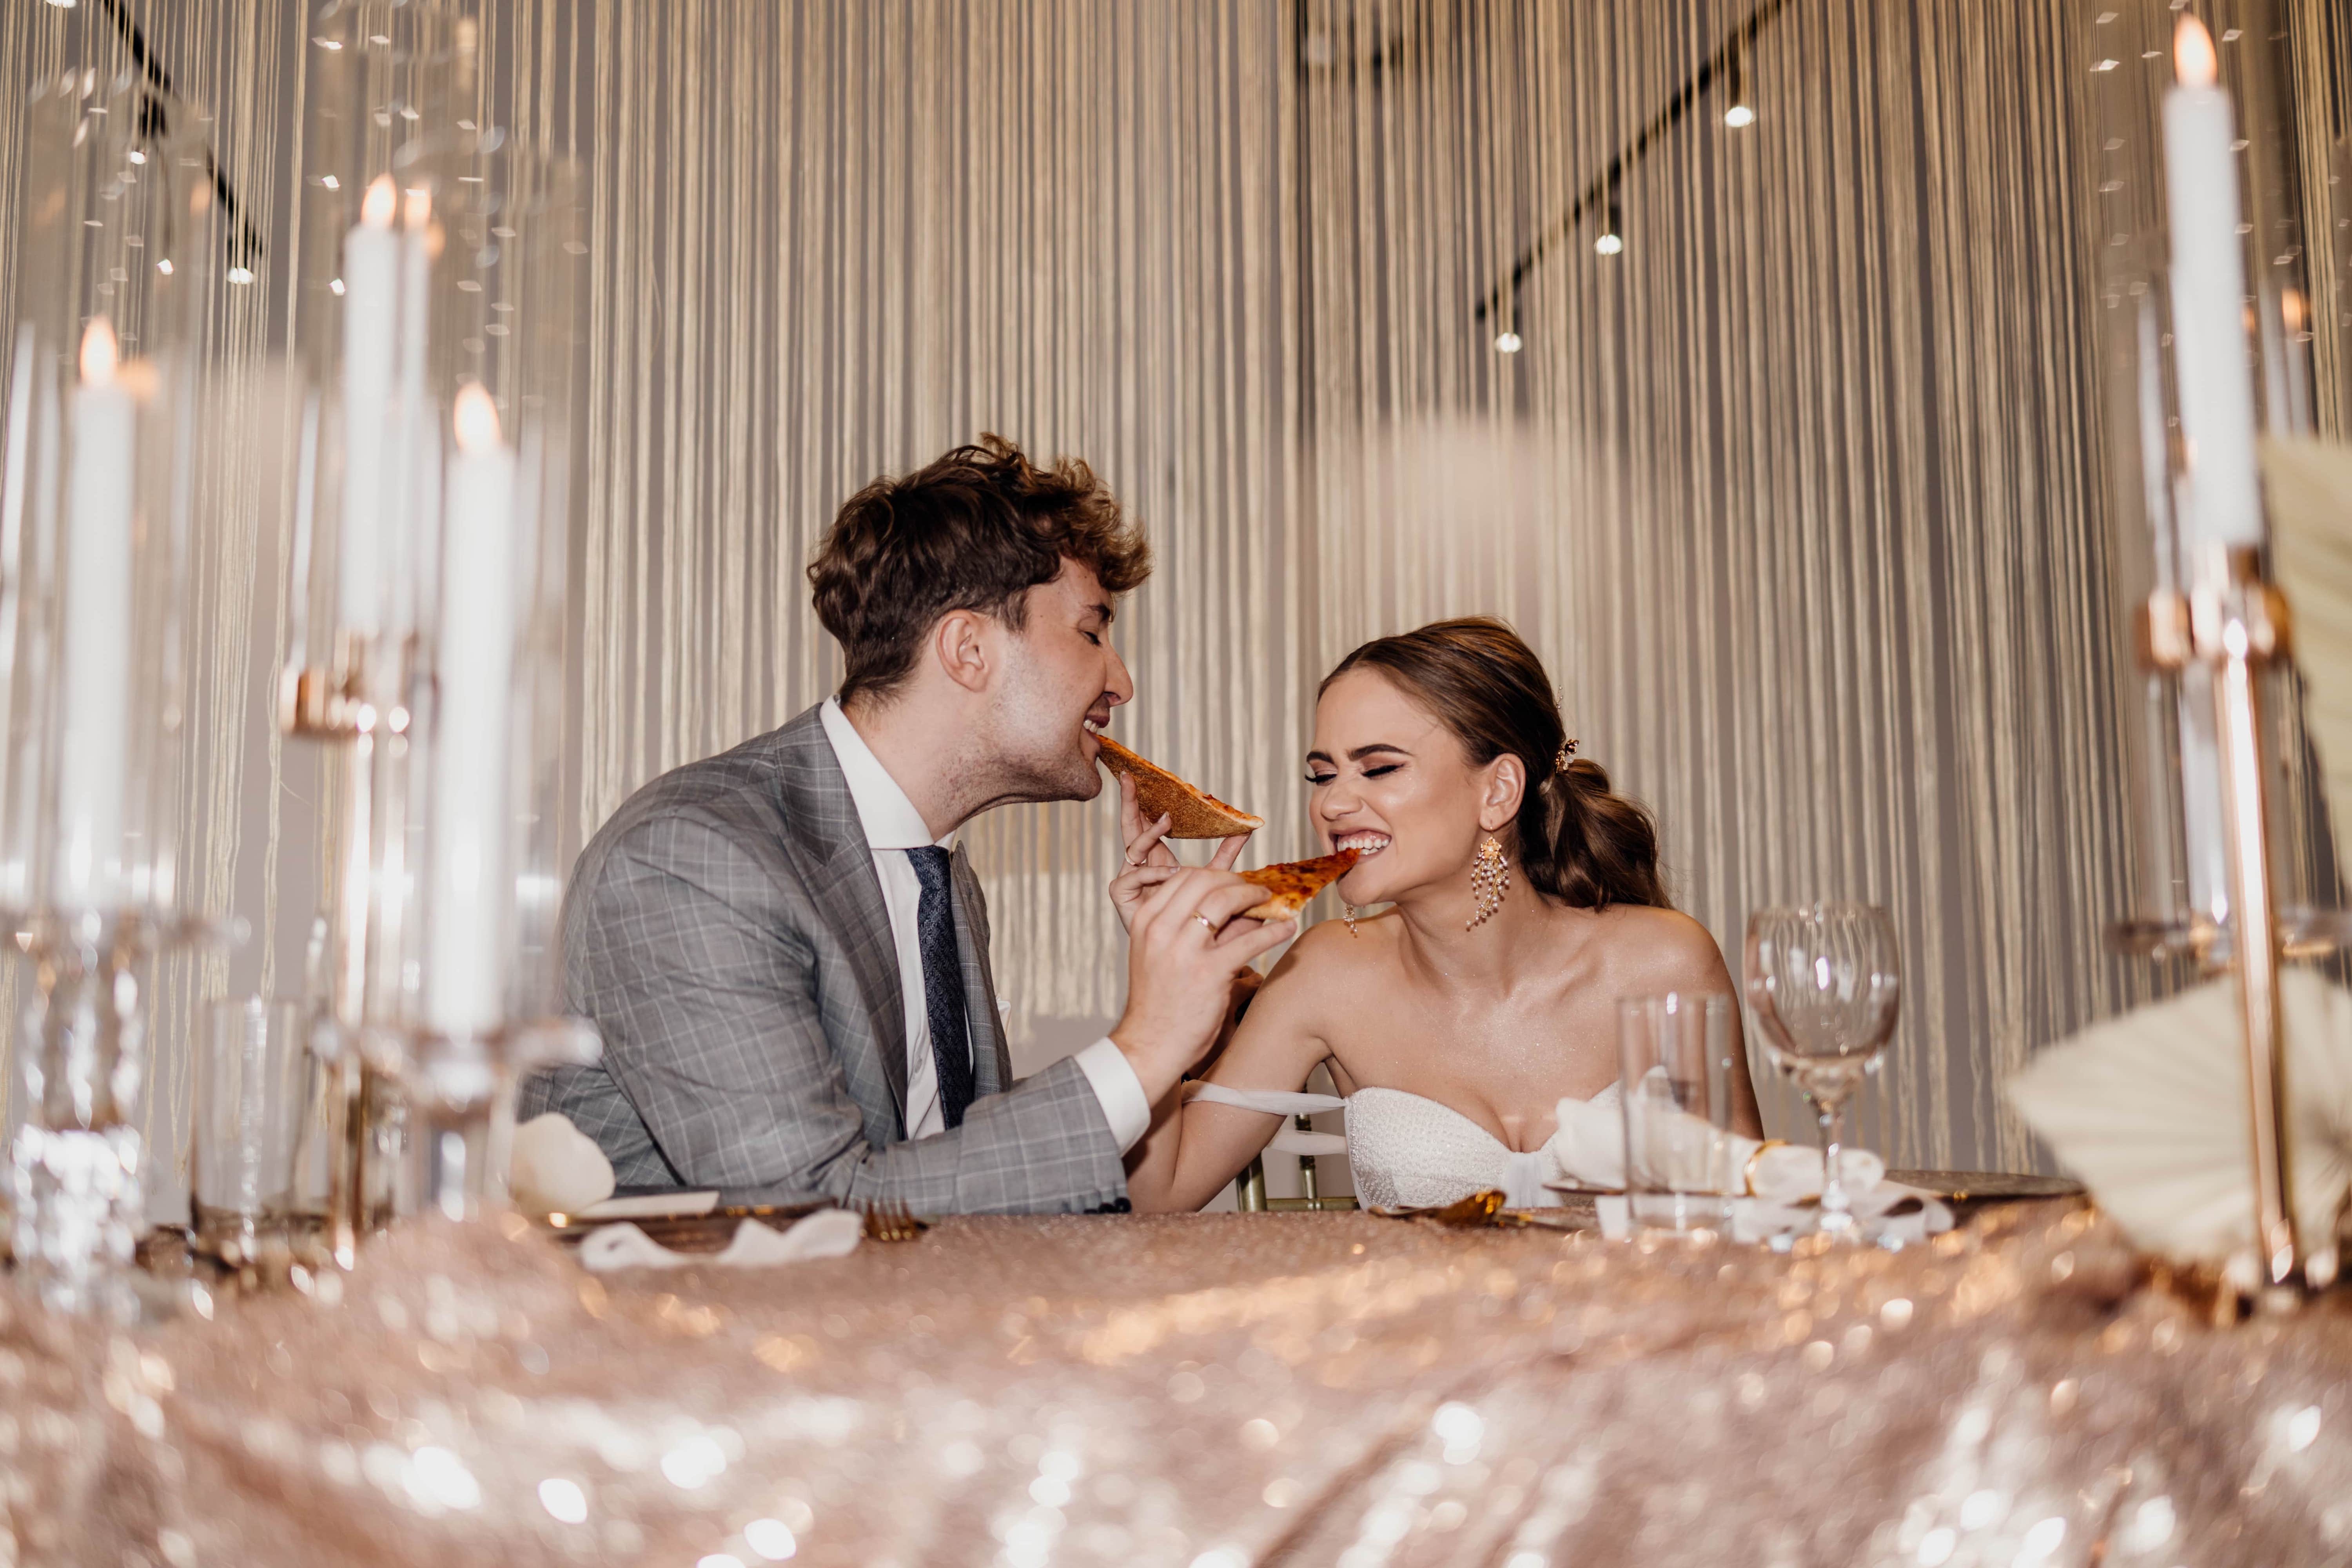 A wedding couple eating pizza